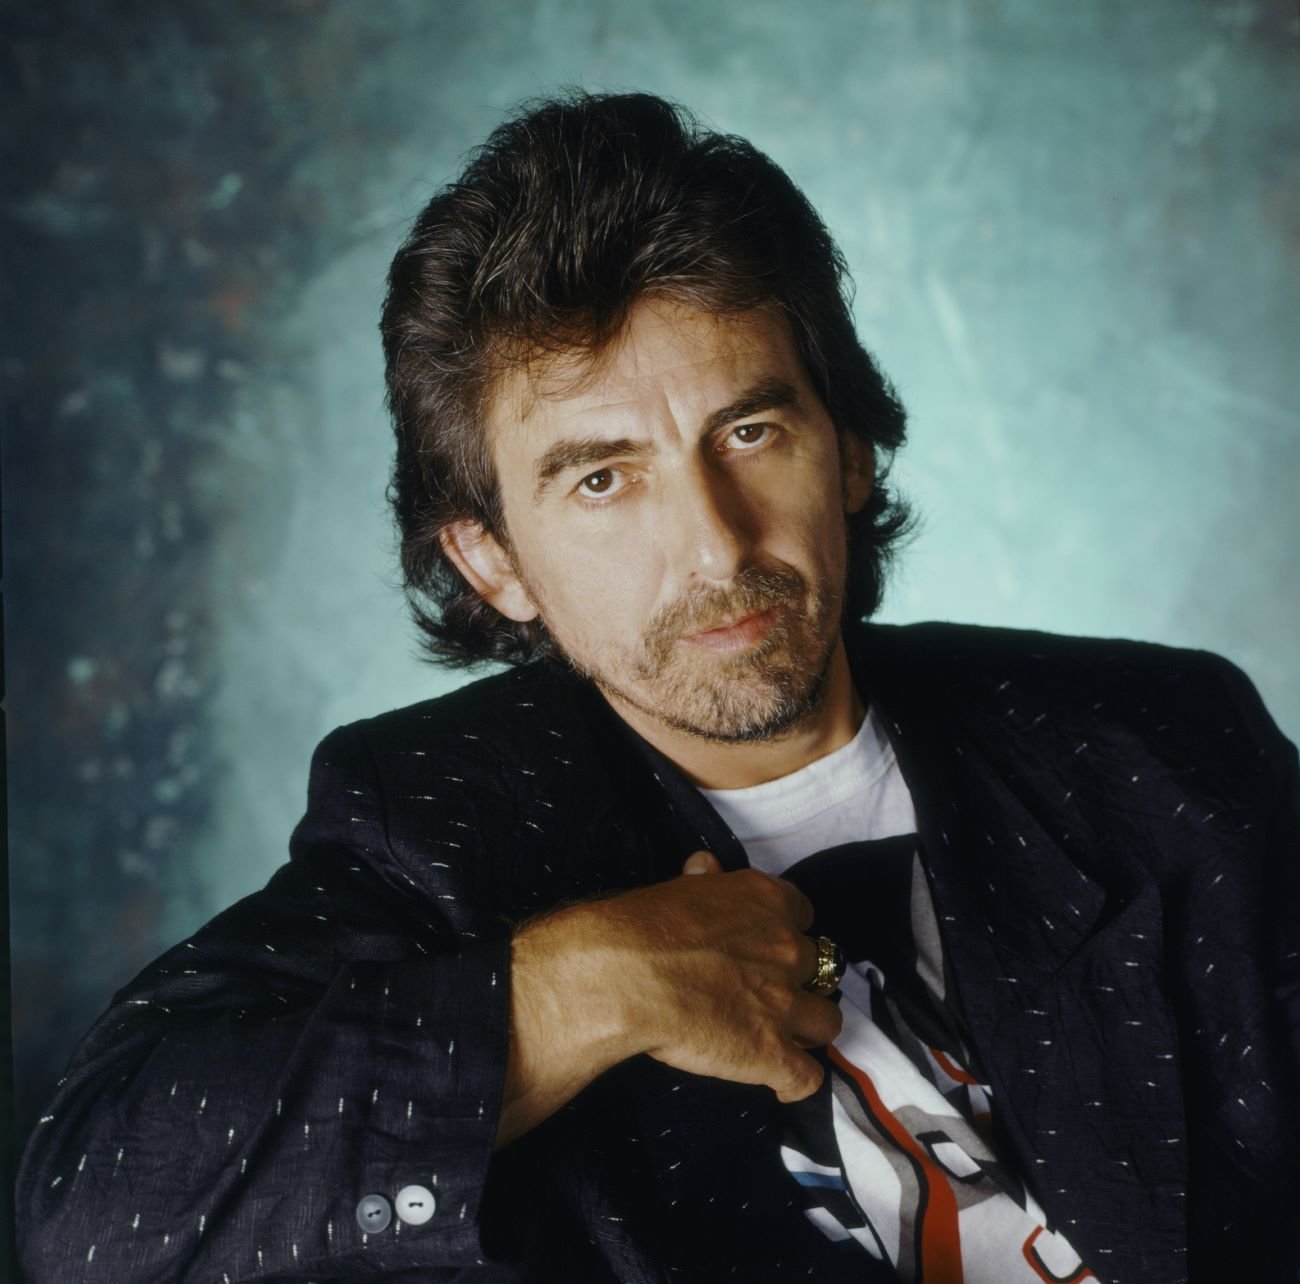 George Harrison leans over the side of his chair against a blue background.